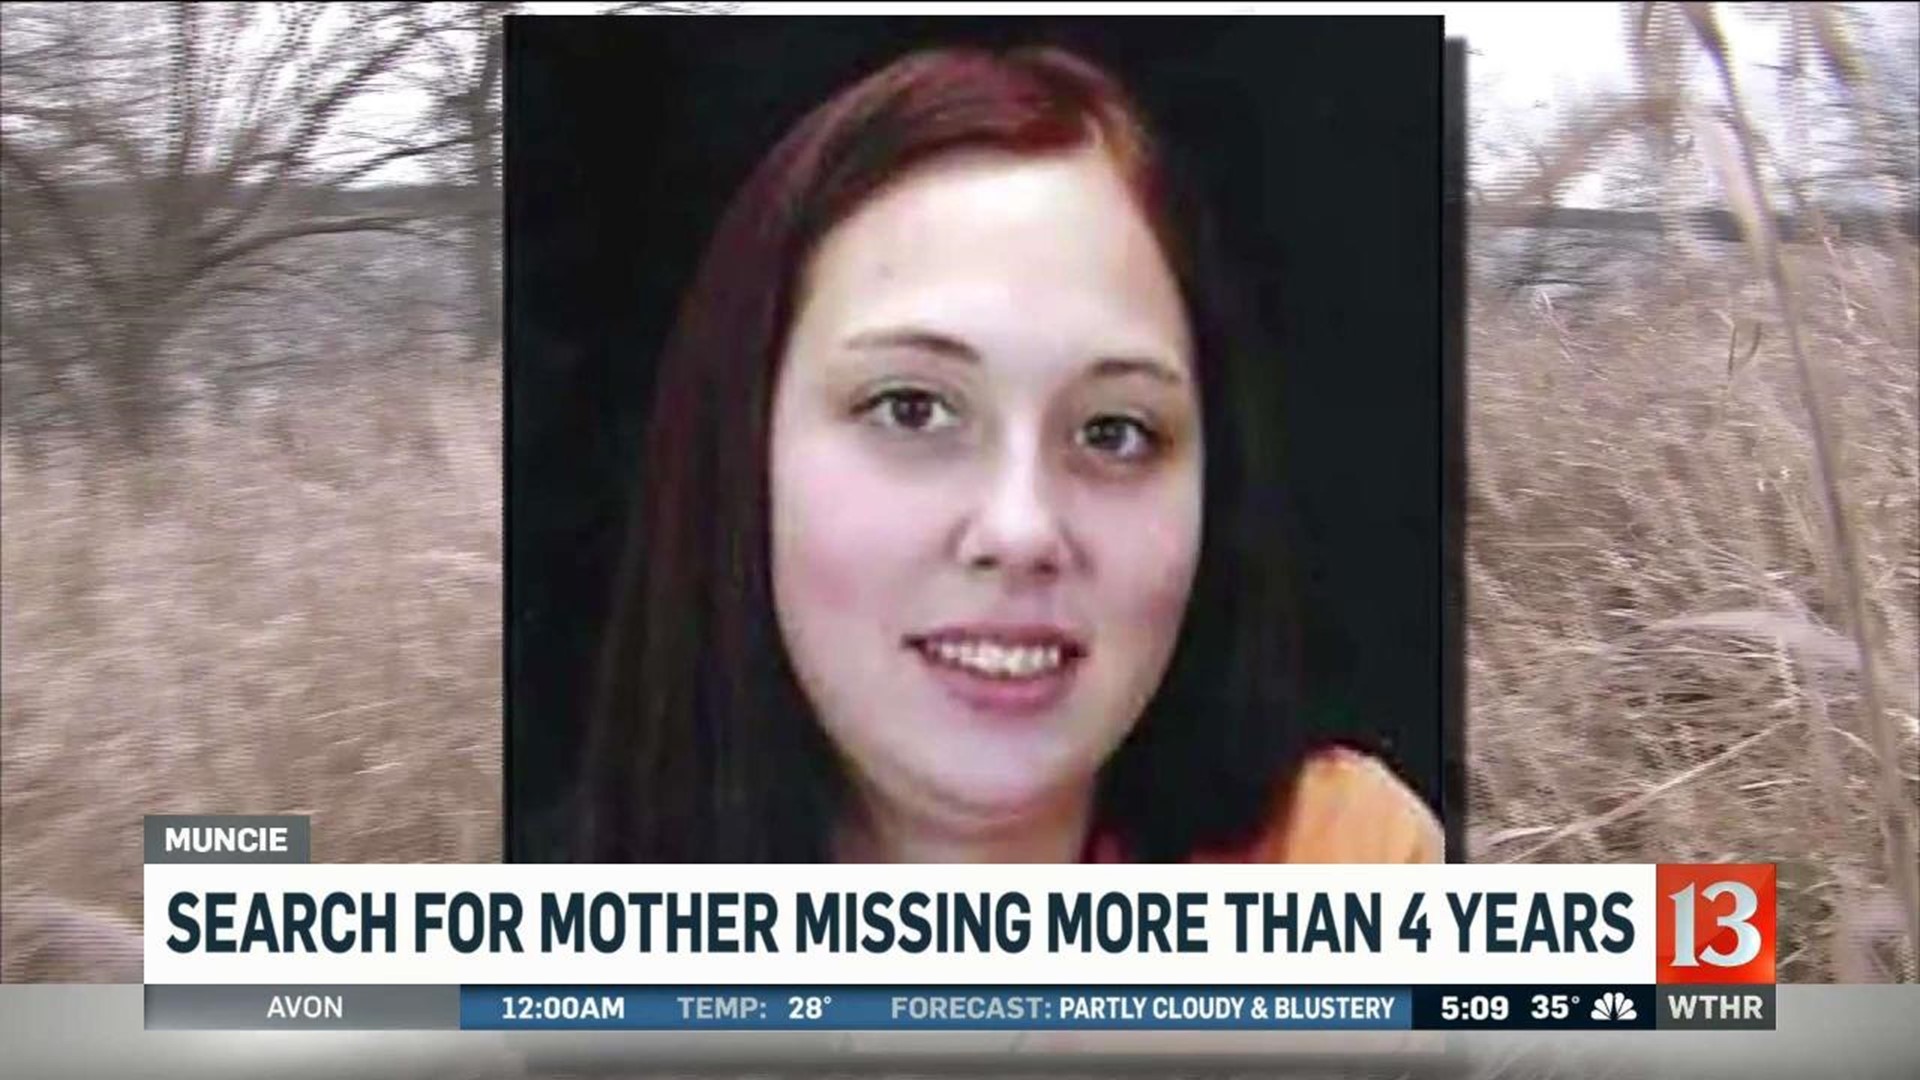 Search for missing Muncie woman